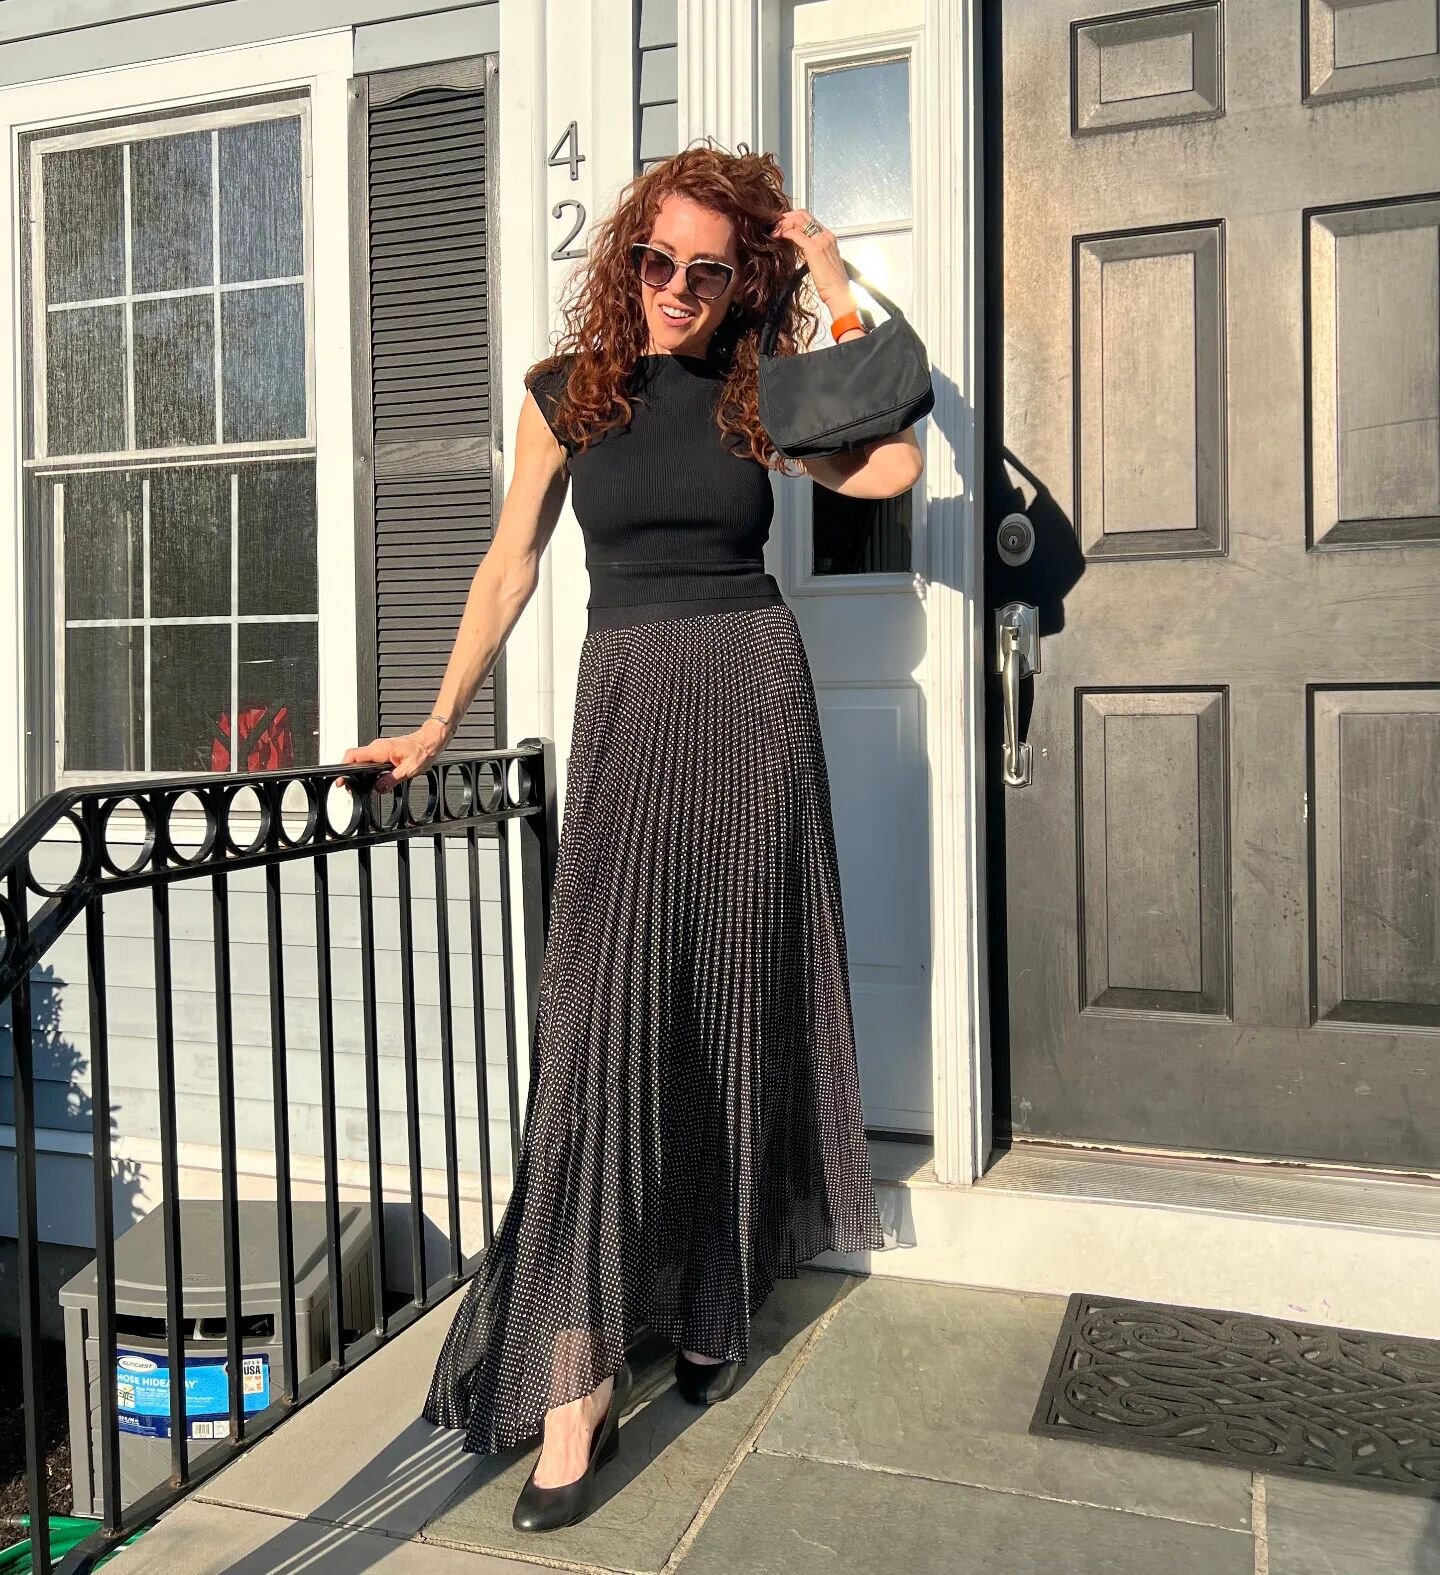 Dressing up a little for an evening out on a gorgeous spring day!  This is how I do black in the spring:  The polka dots on the pleated skirt add lightness to the black knit.  Finished off with classic black pumps.  Fashion tip of the day - buy quali